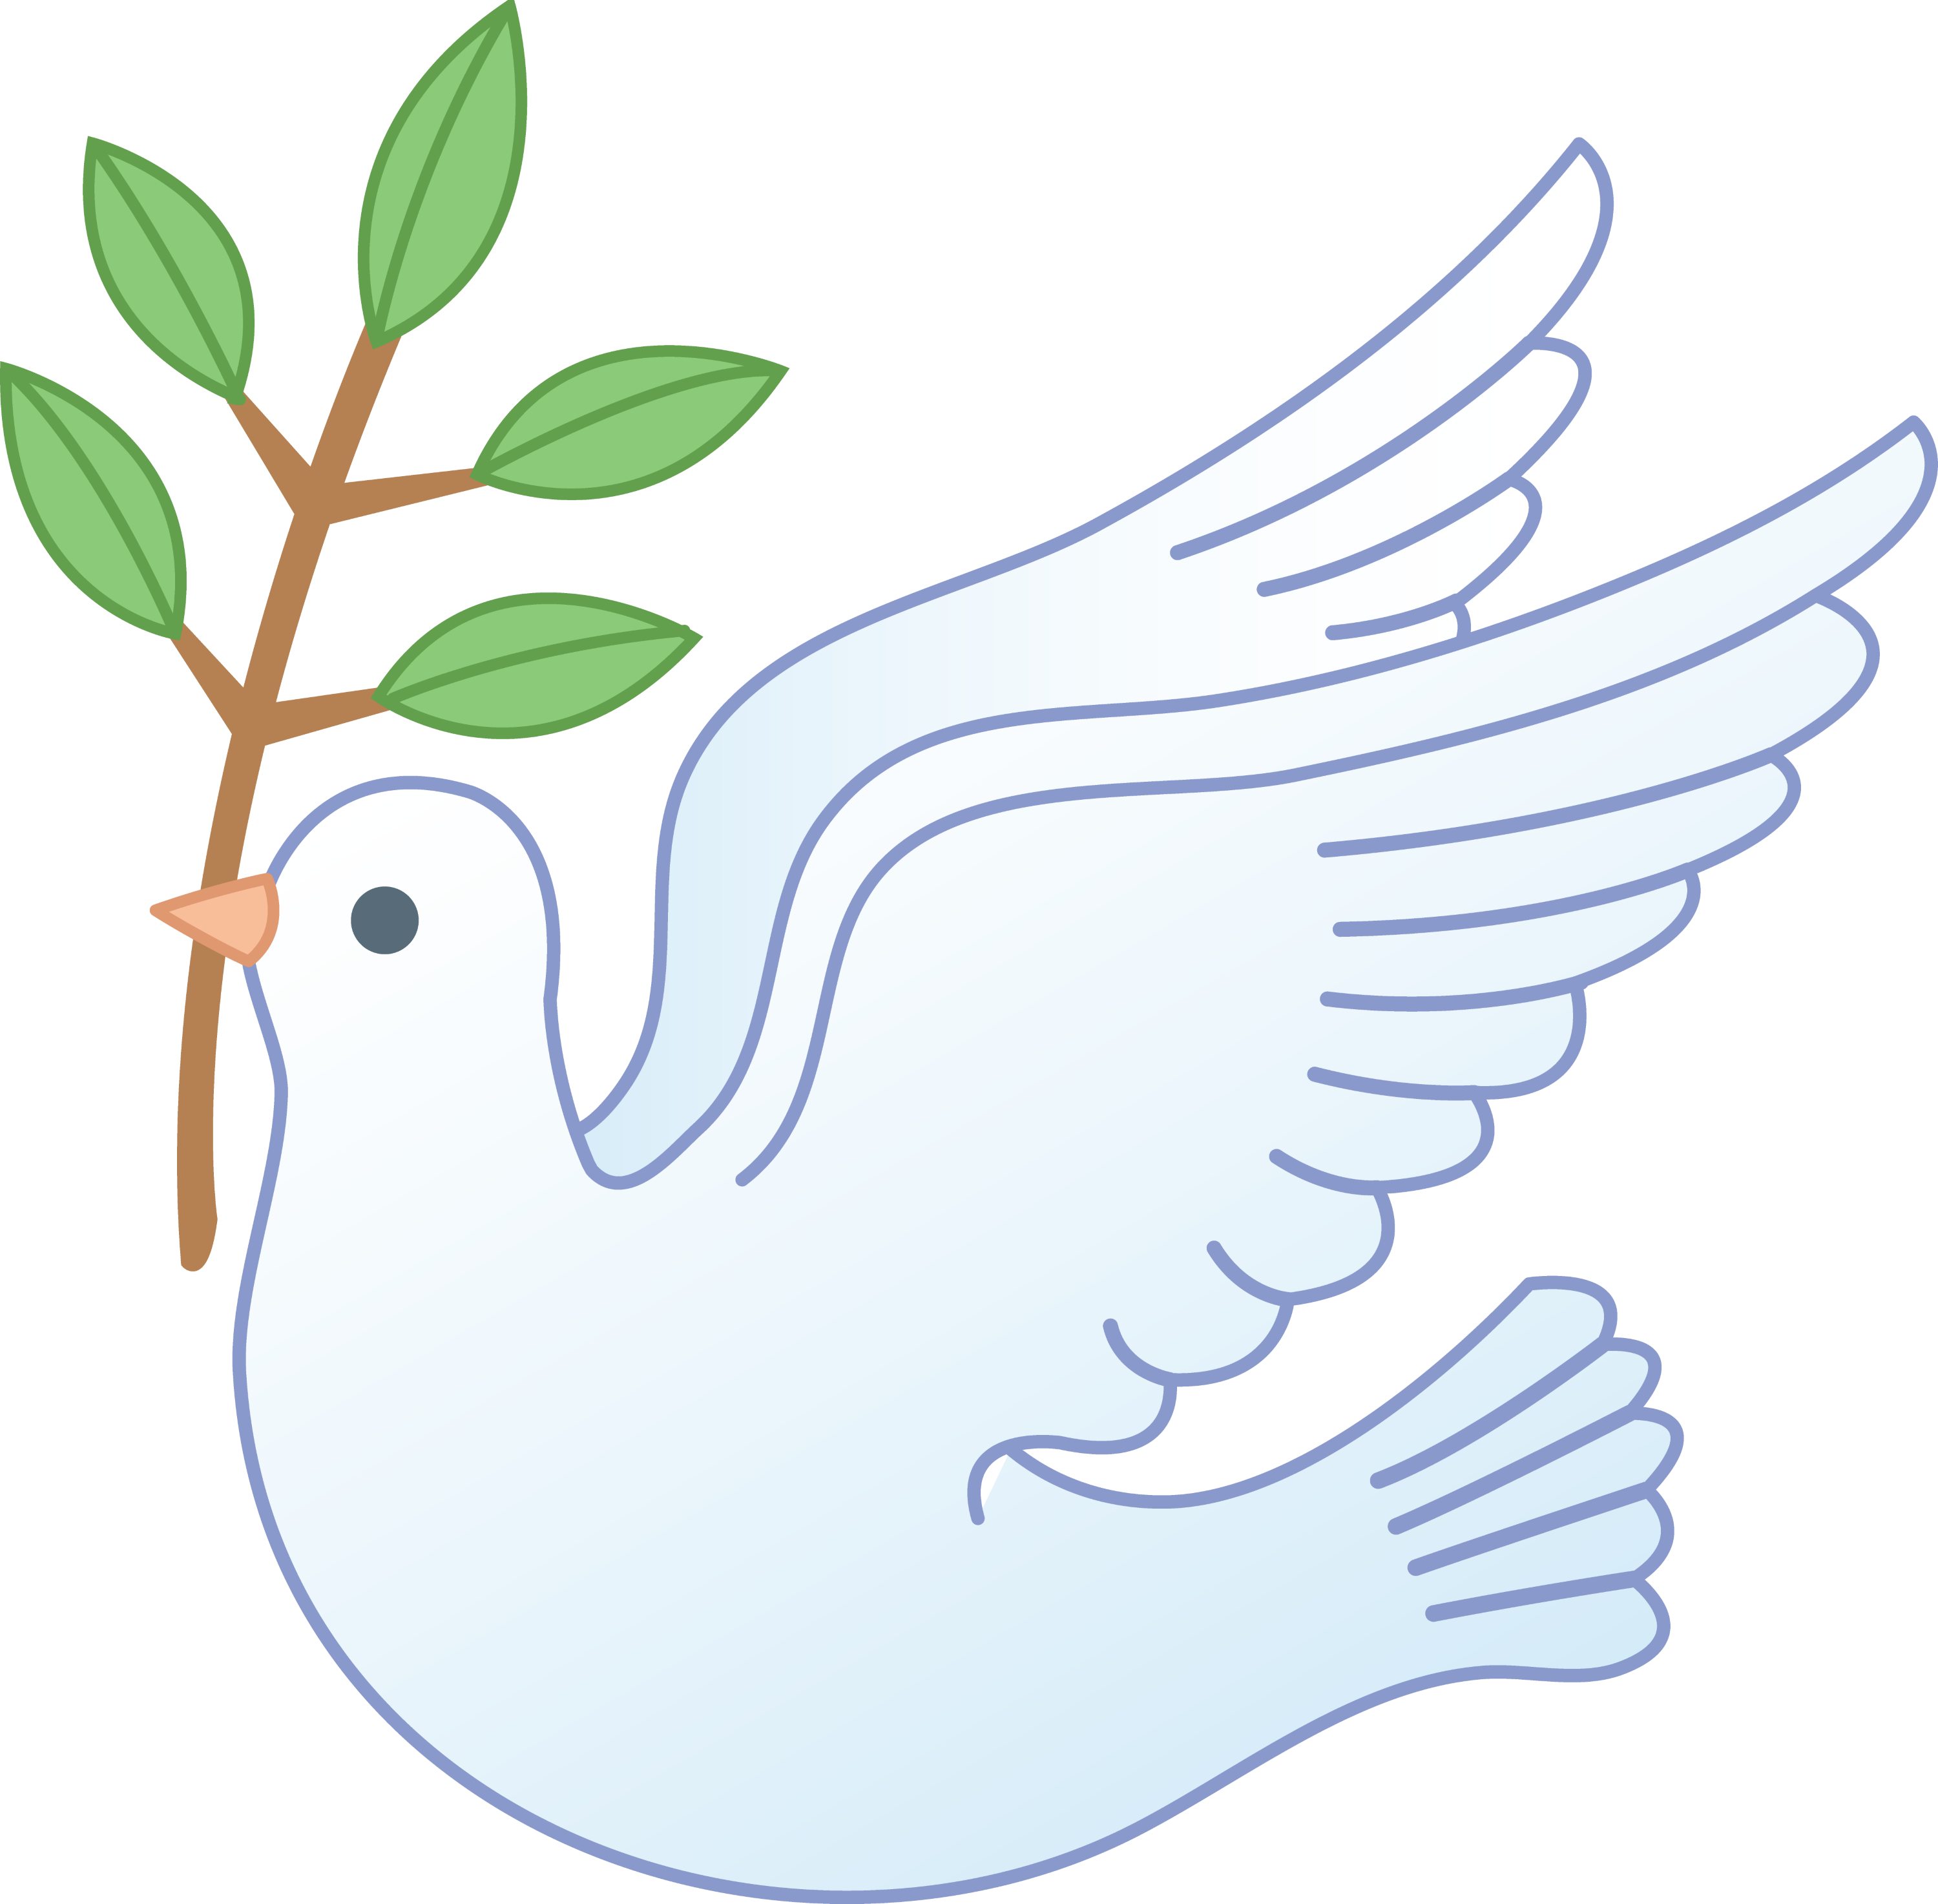 free christian clipart of doves - photo #14